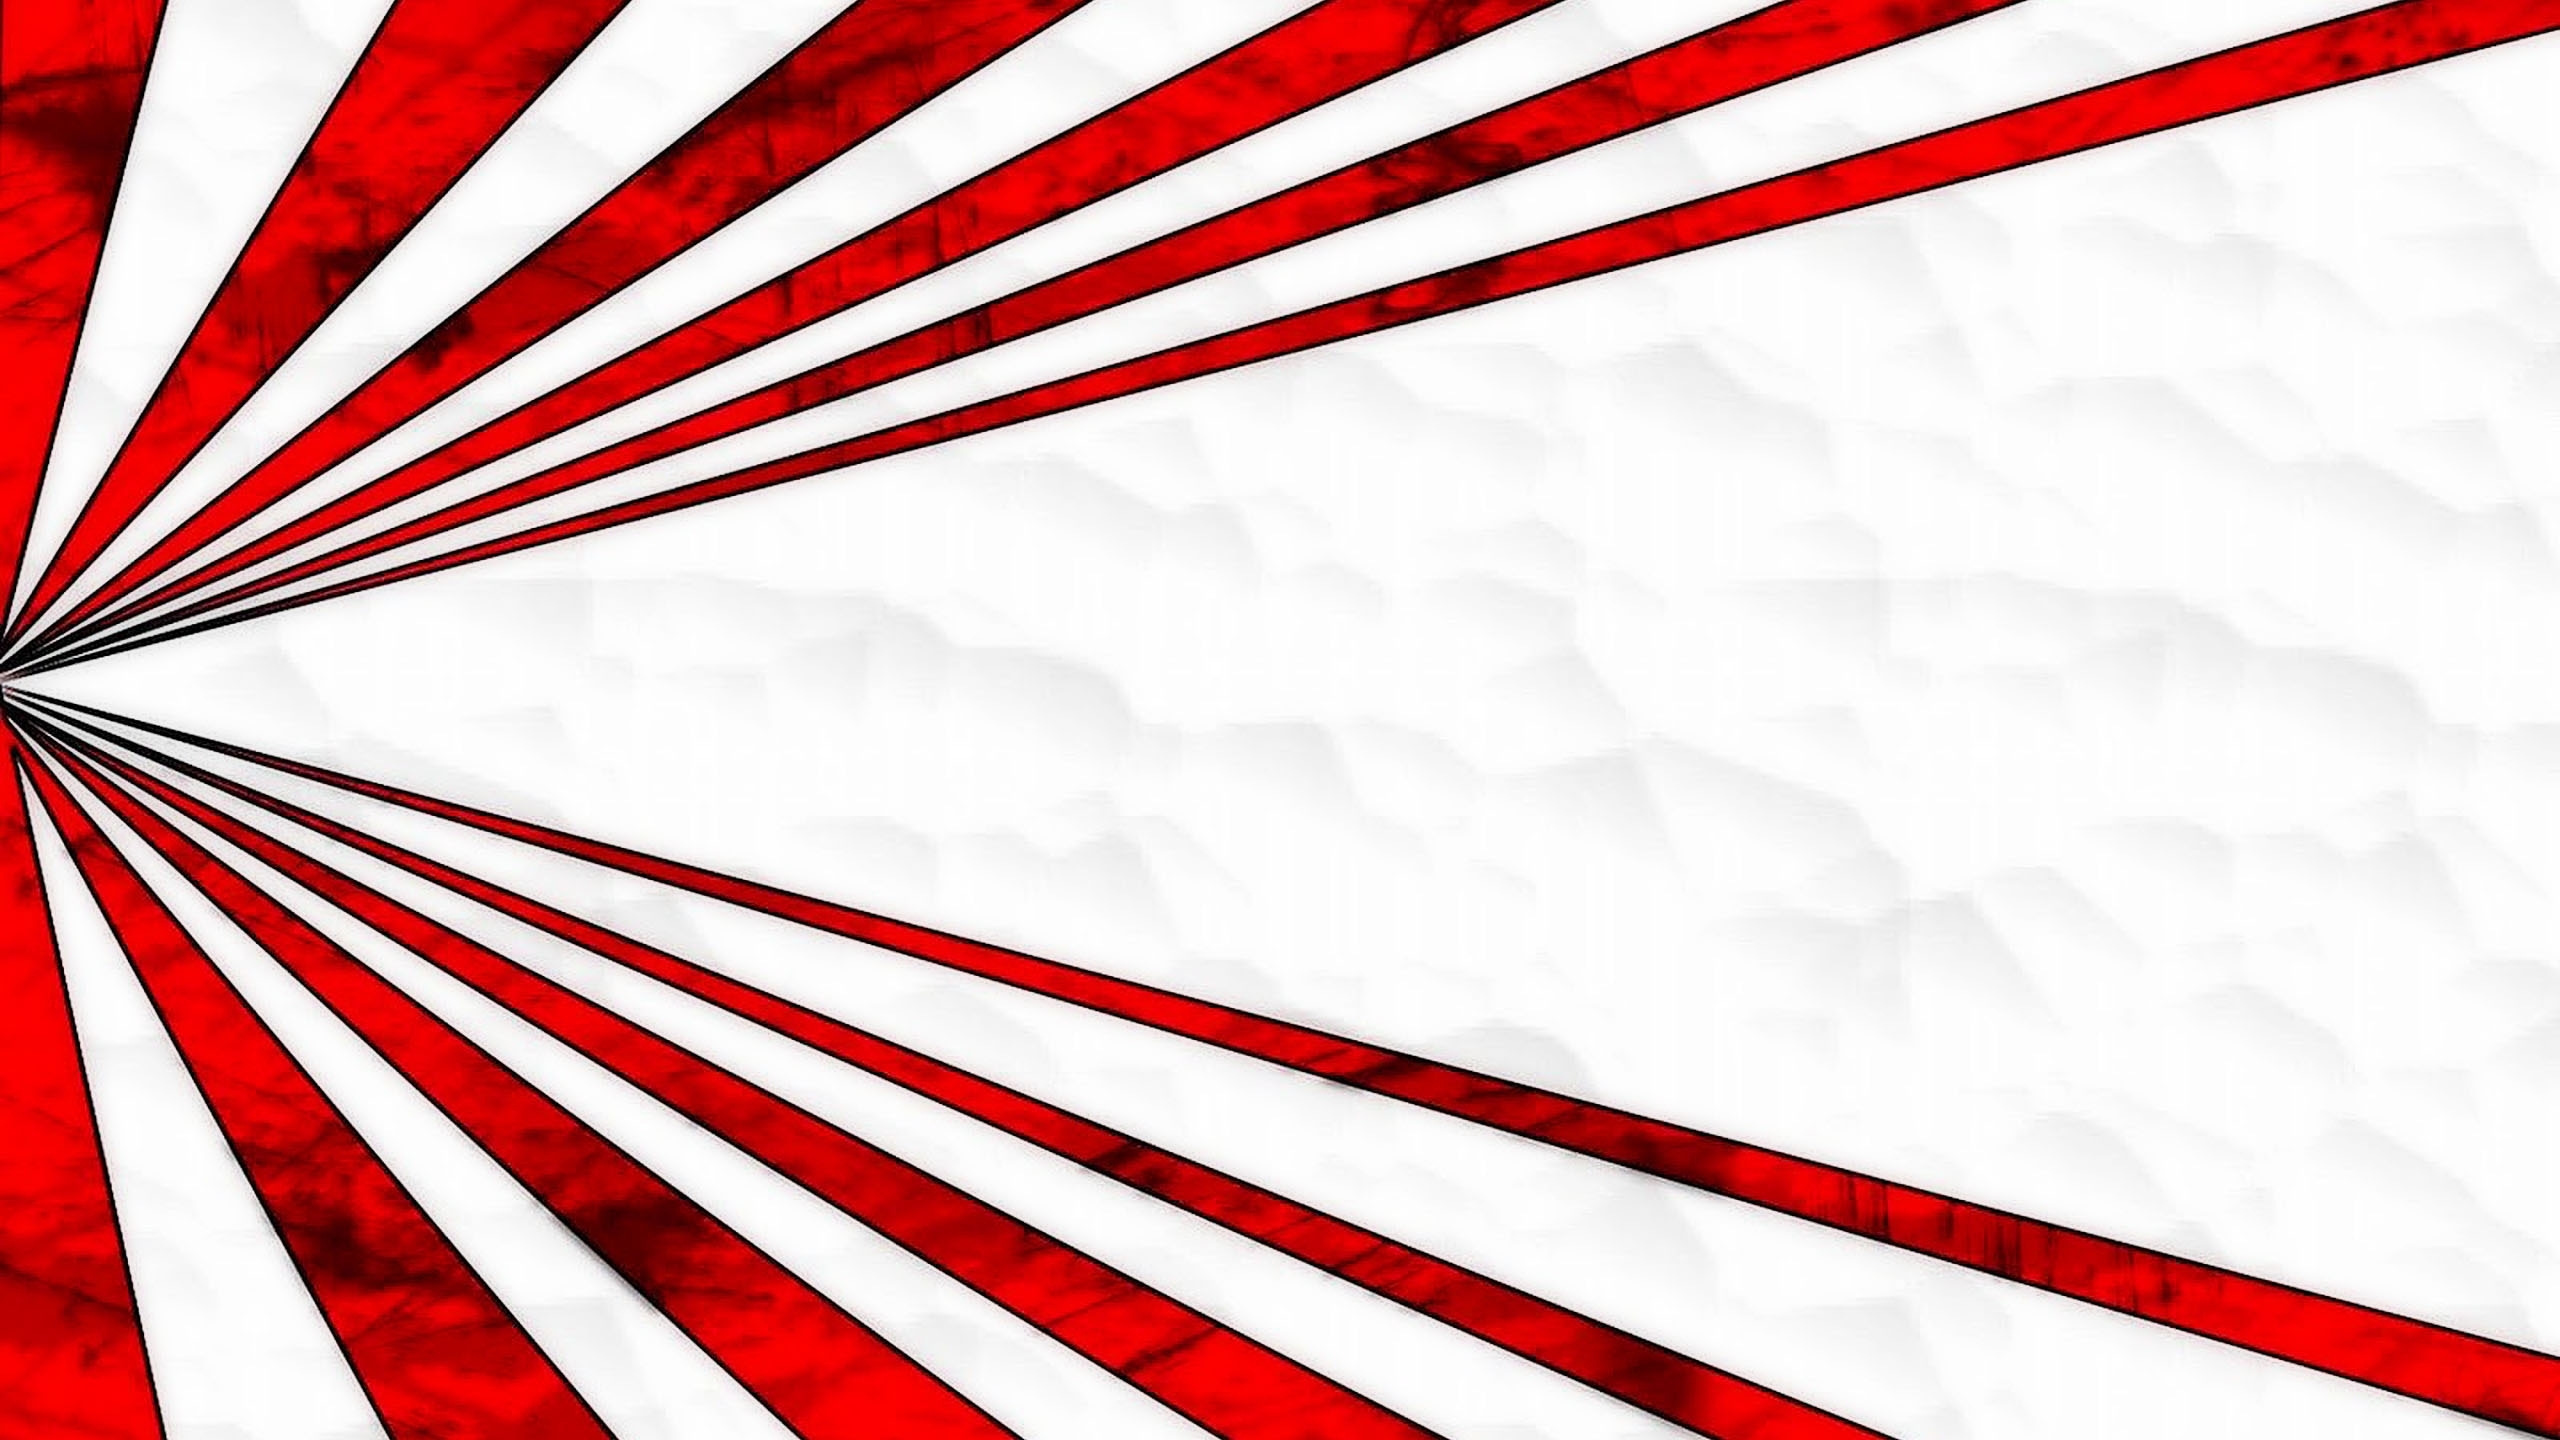 10 Best Red And White Abstract Wallpaper FULL HD 1080p For PC Desktop 2021